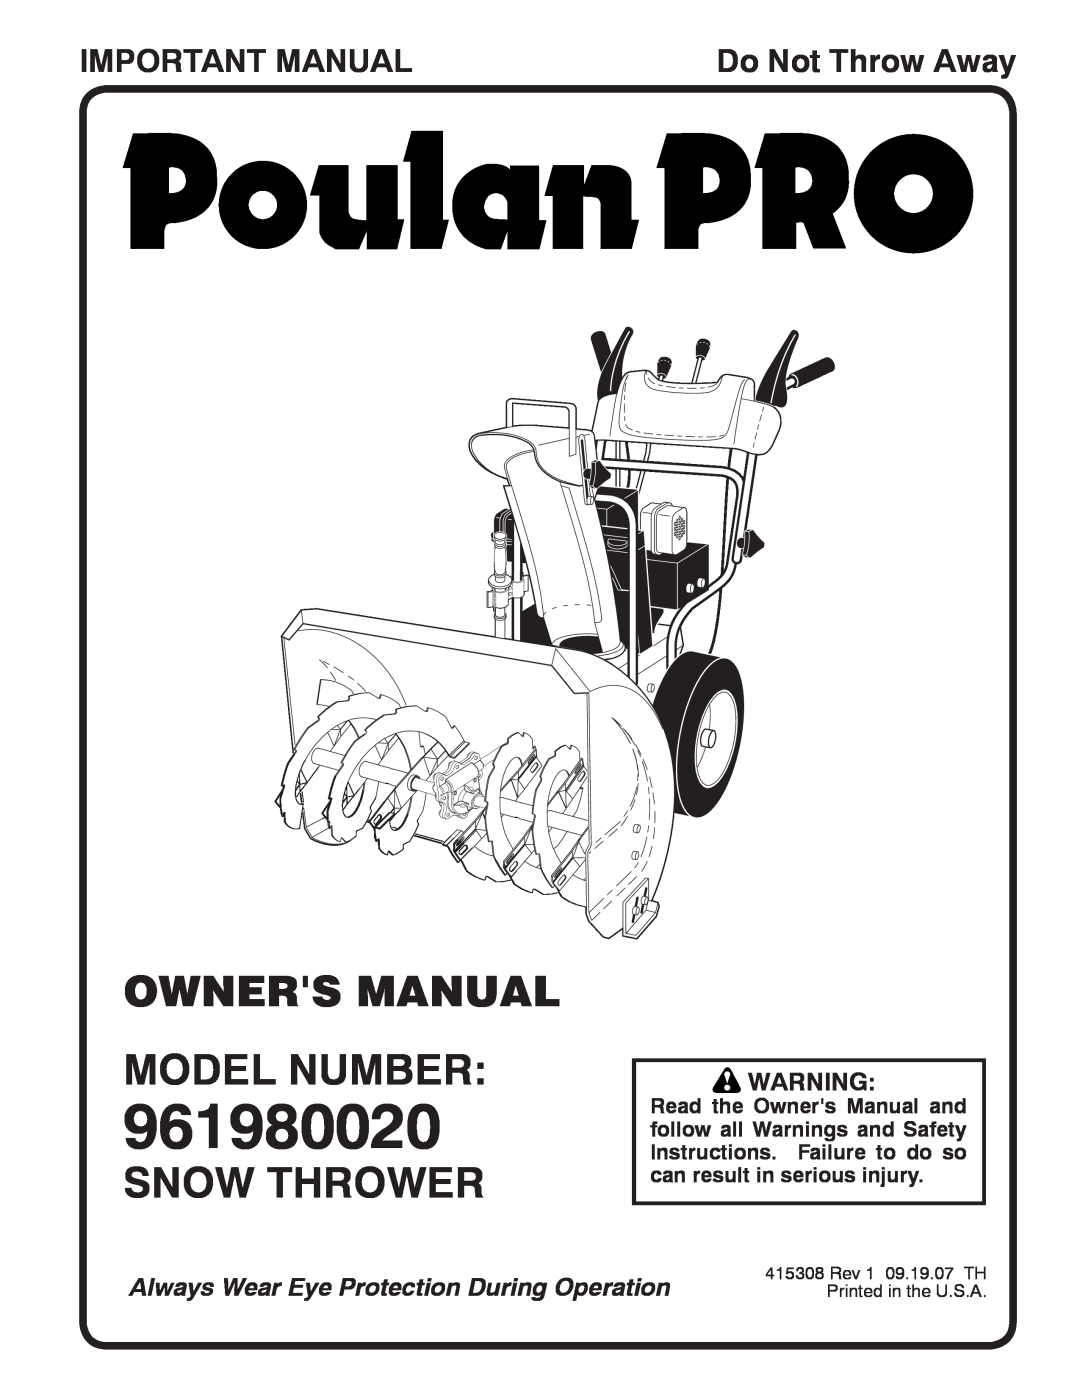 Poulan 96198002000, 415308 owner manual Snow Thrower, Important Manual, Do Not Throw Away 